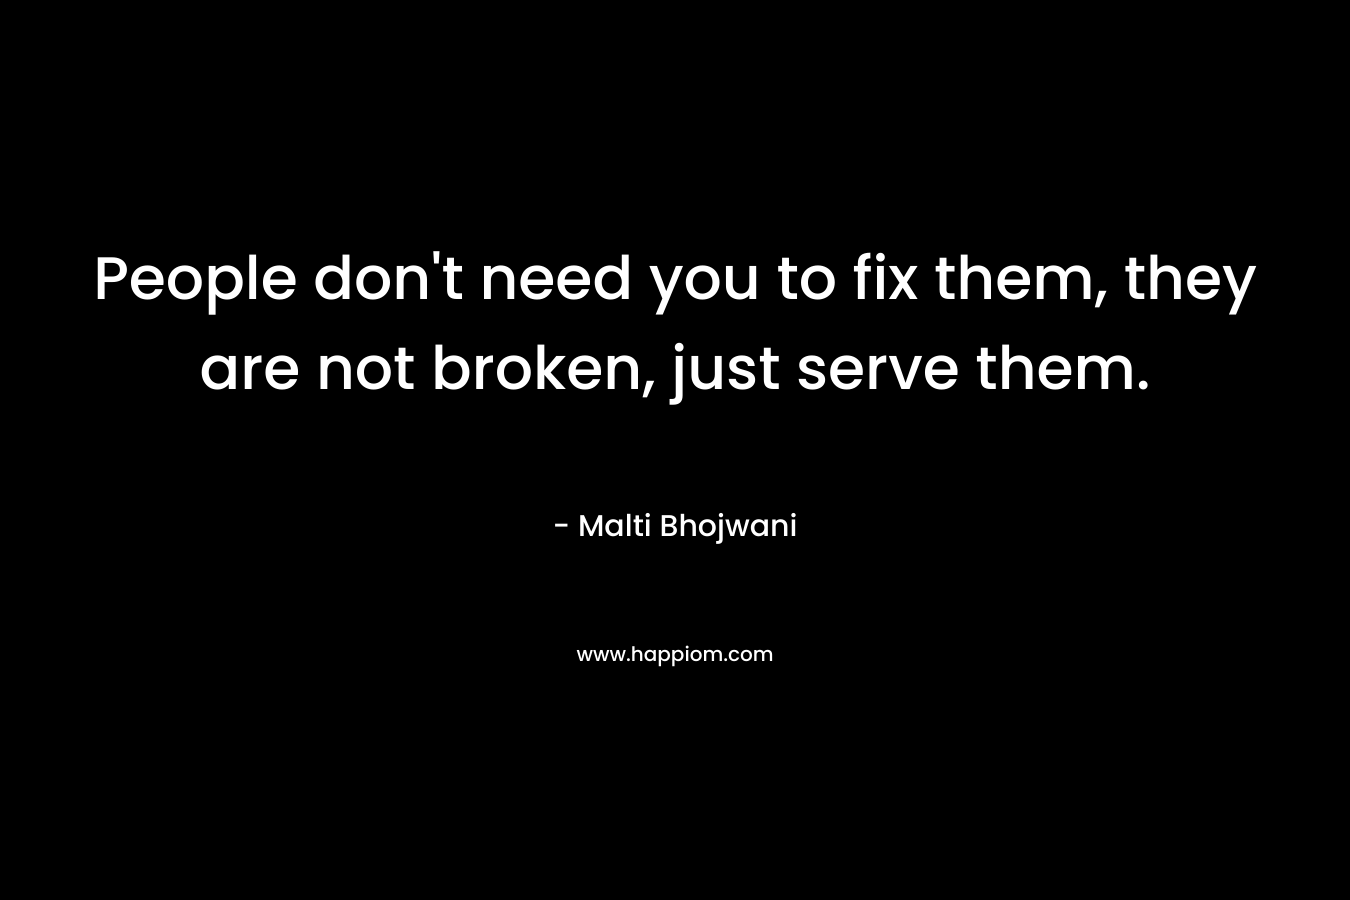 People don’t need you to fix them, they are not broken, just serve them. – Malti Bhojwani